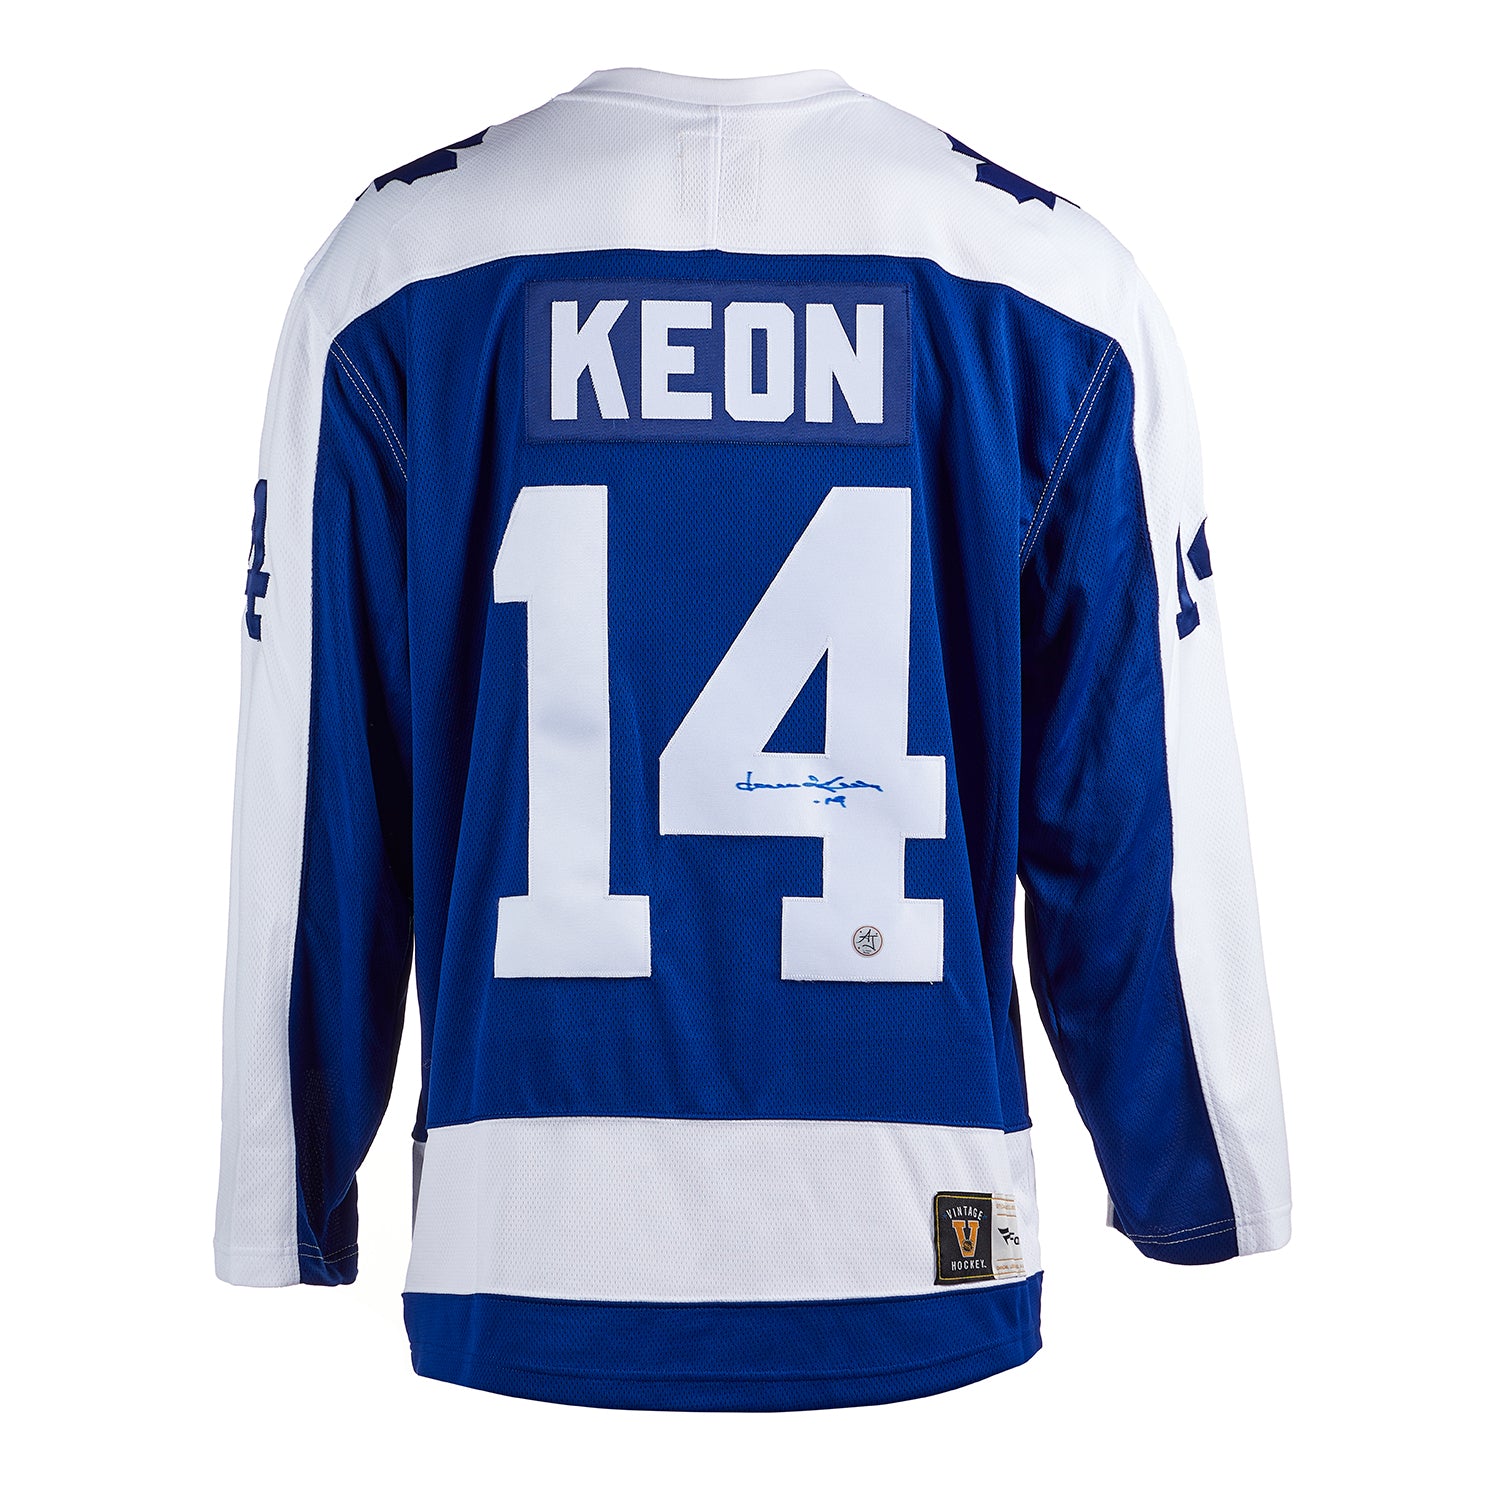 Dave Keon 1972 Toronto Maple Leafs Vintage Home Throwback NHL Jersey